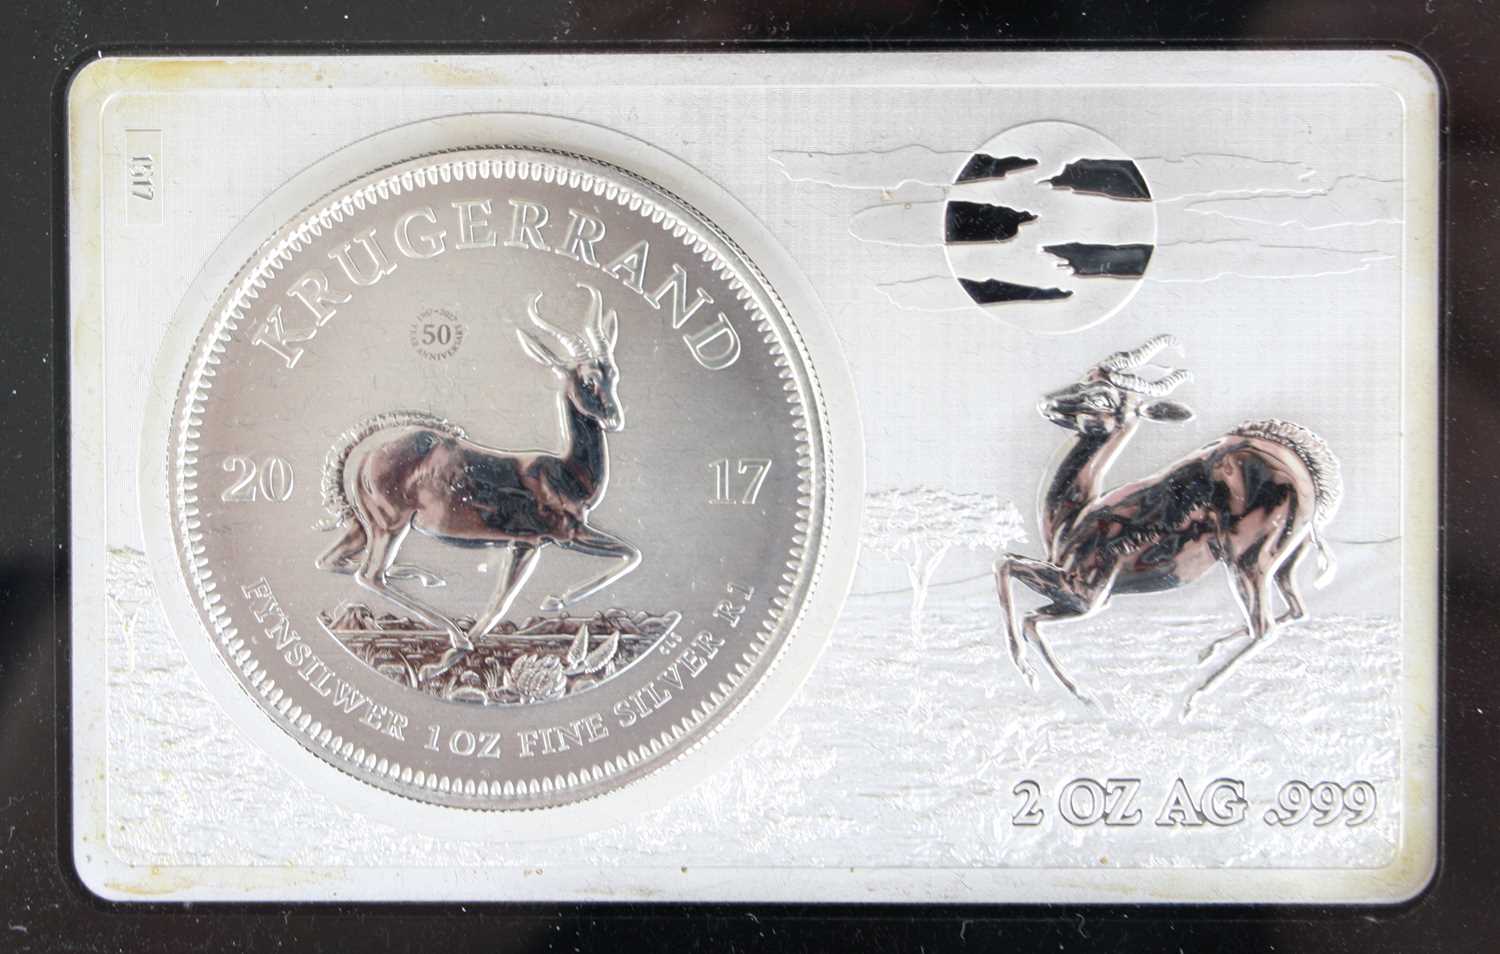 South African Mint, 1967-2017 50th Anniversary of the Krugerrand Silver Bullion Coin Bar, a 1 oz - Image 2 of 2